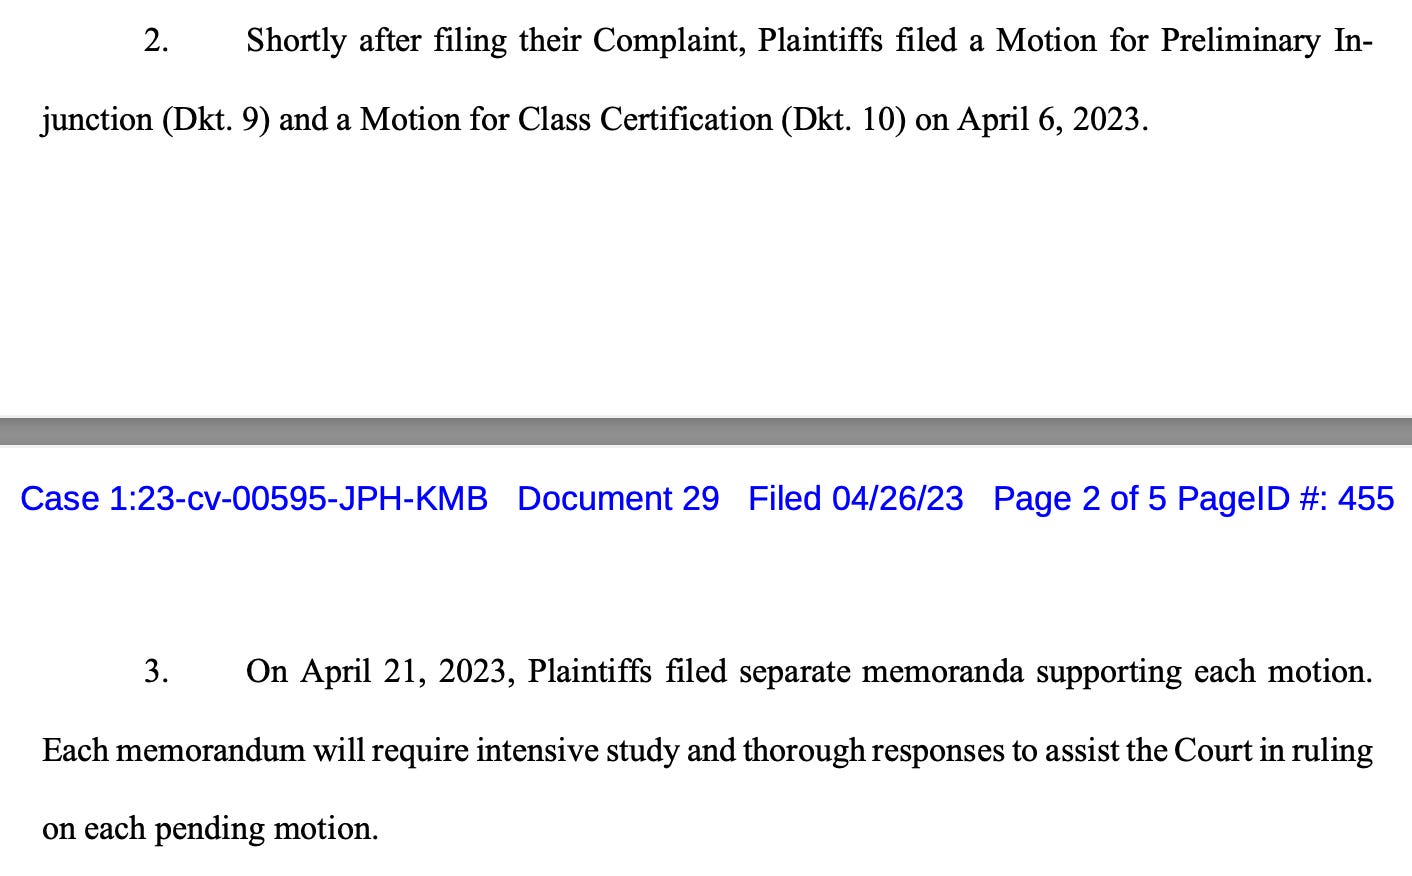 2. Shortly after filing their Complaint, Plaintiffs filed a Motion for Preliminary In- junction (Dkt. 9) and a Motion for Class Certification (Dkt. 10) on April 6, 2023.  3. On April 21, 2023, Plaintiffs filed separate memoranda supporting each motion. Each memorandum will require intensive study and thorough responses to assist the Court in ruling on each pending motion.